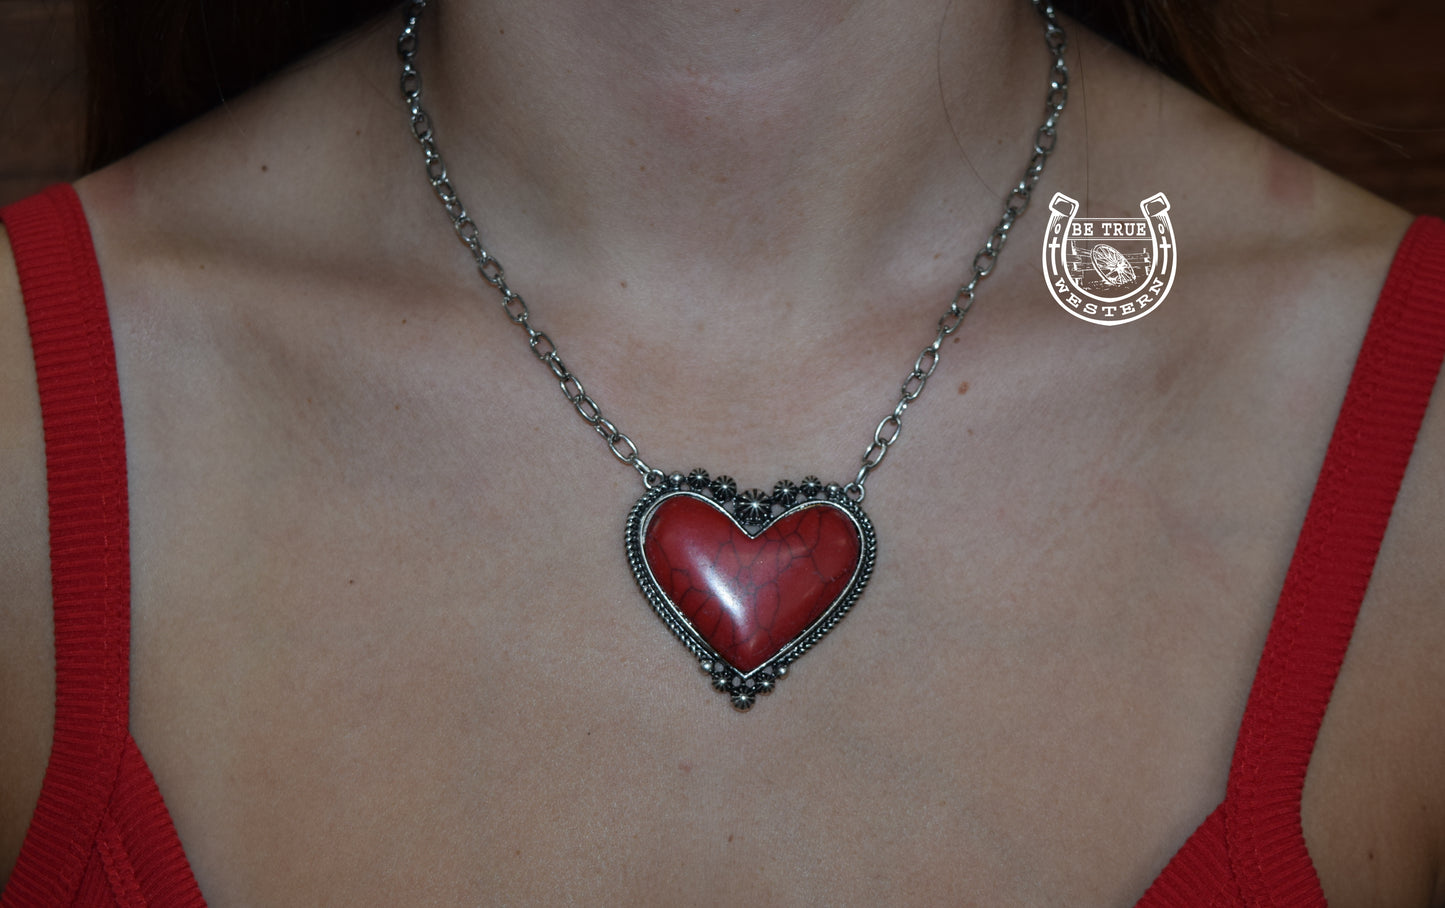 The Red Heart Necklace